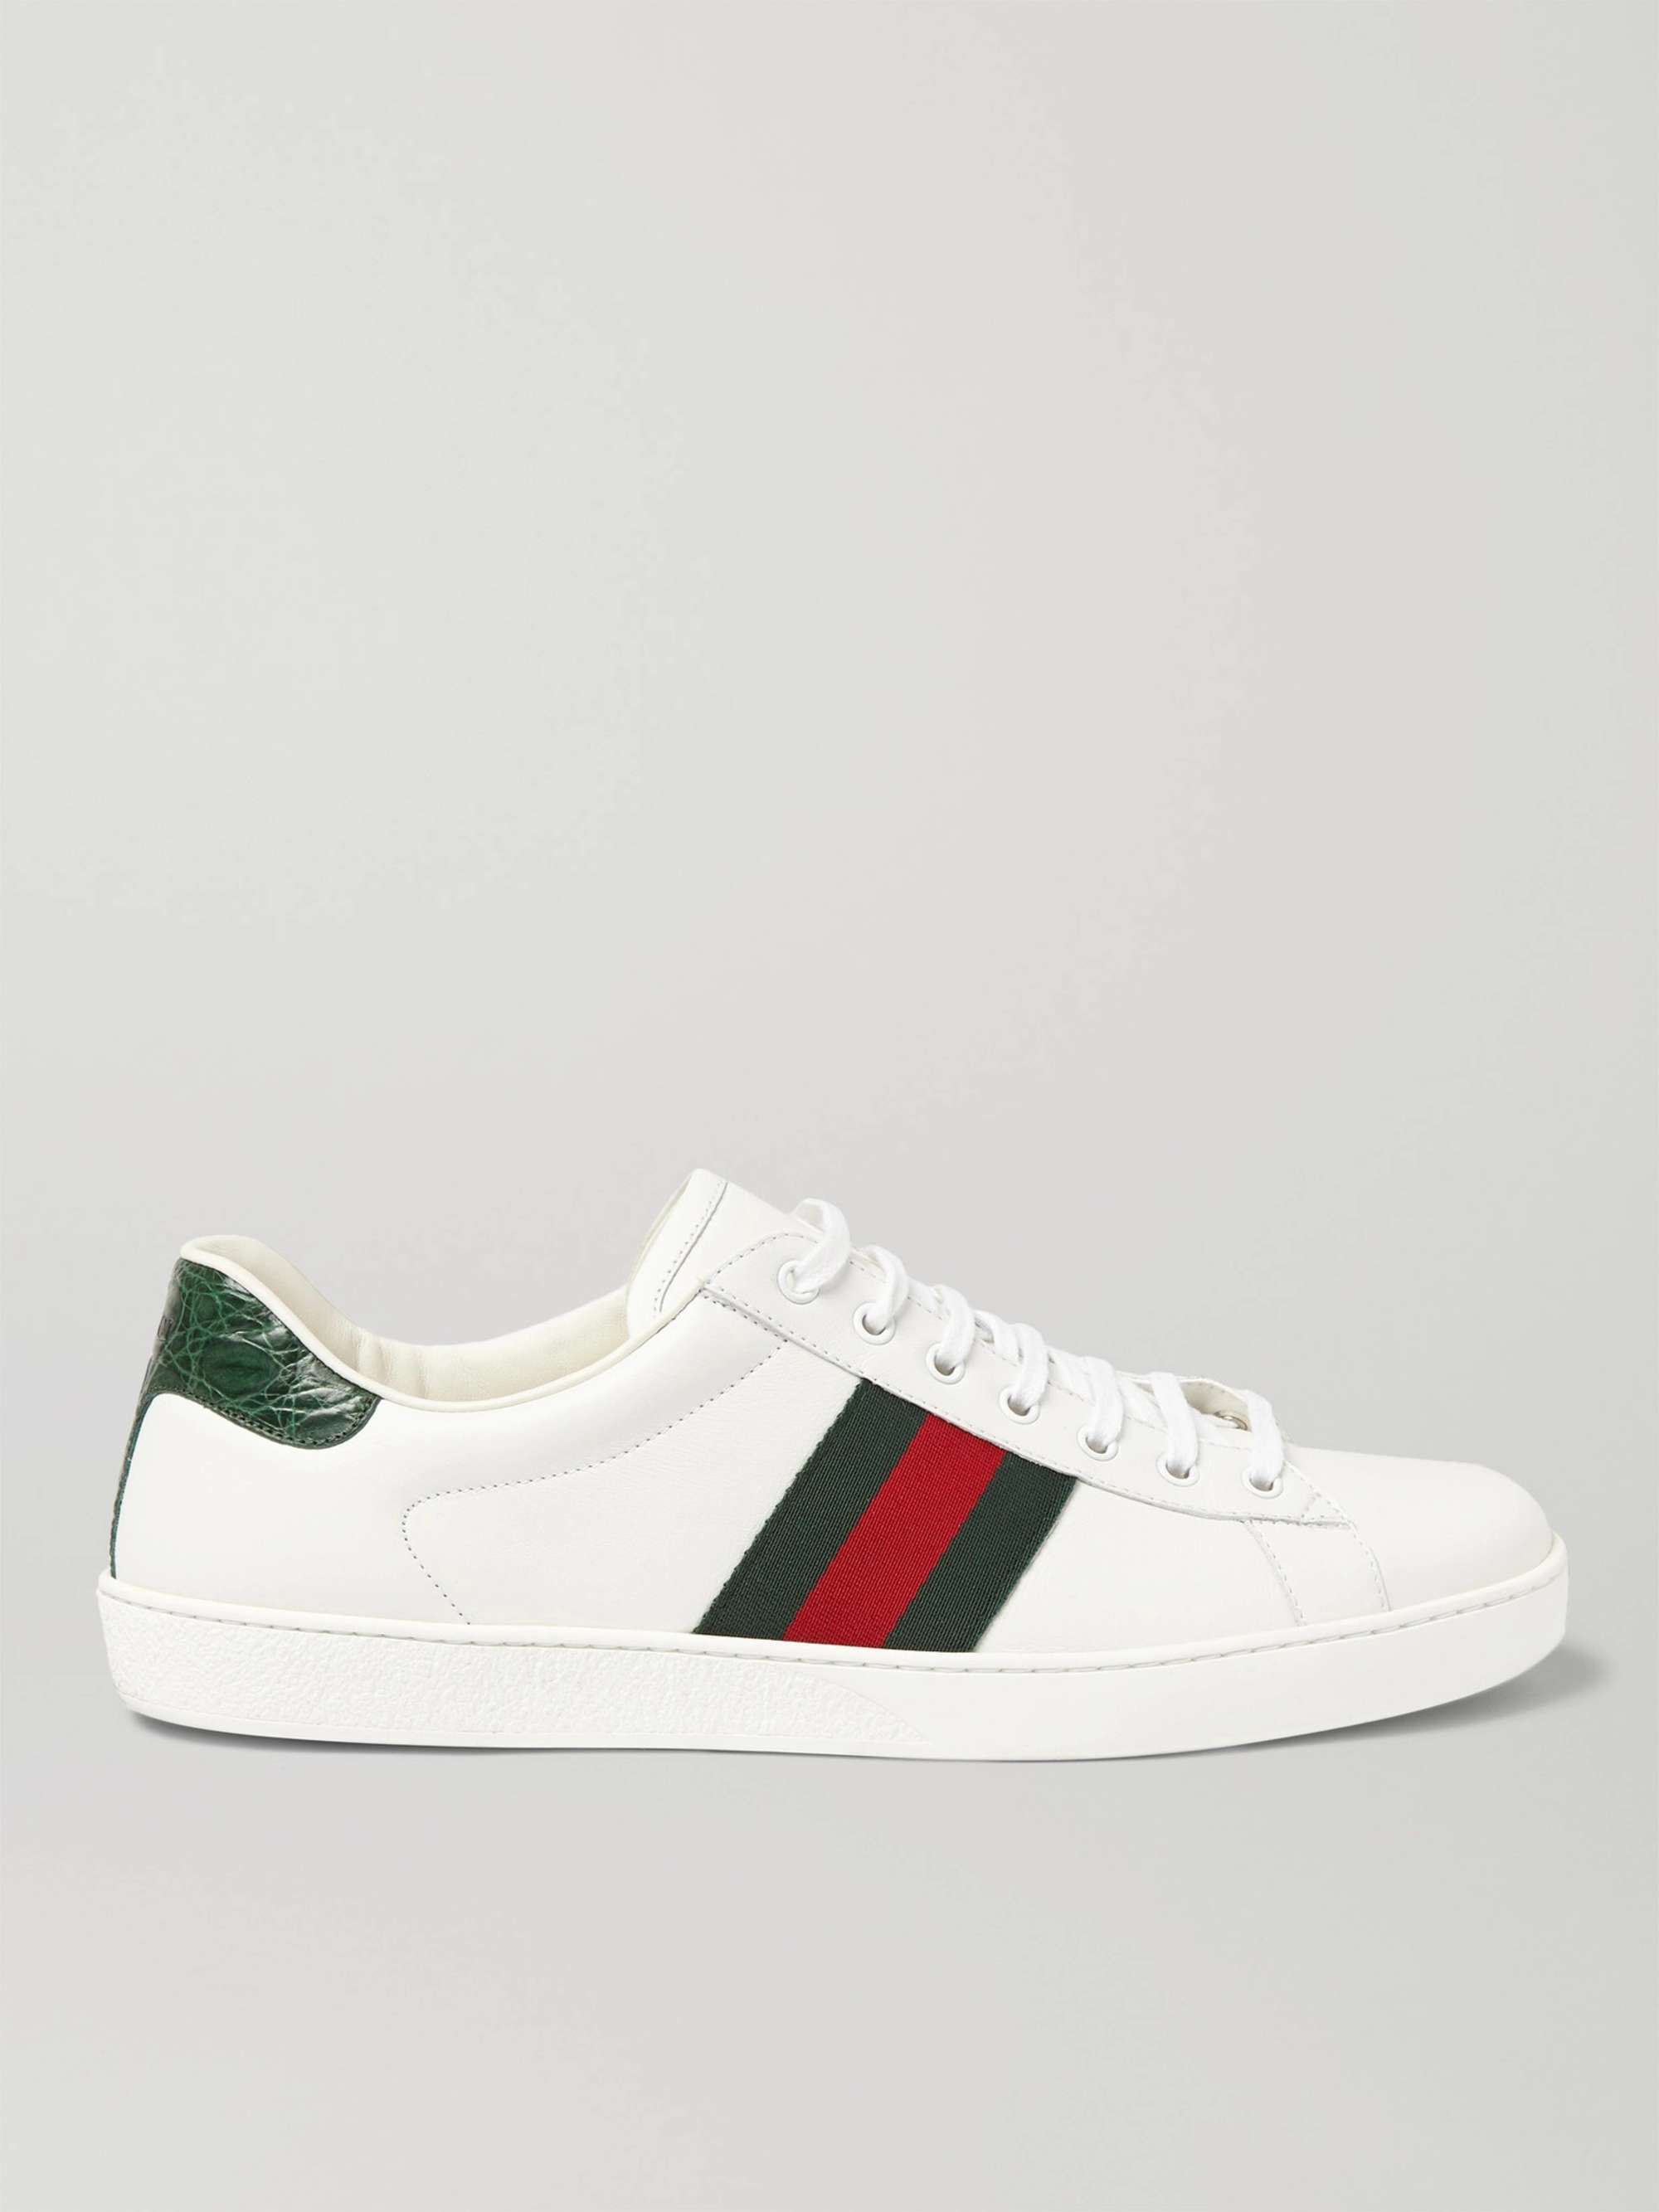 GUCCI Ace Leather Sneakers for MR PORTER